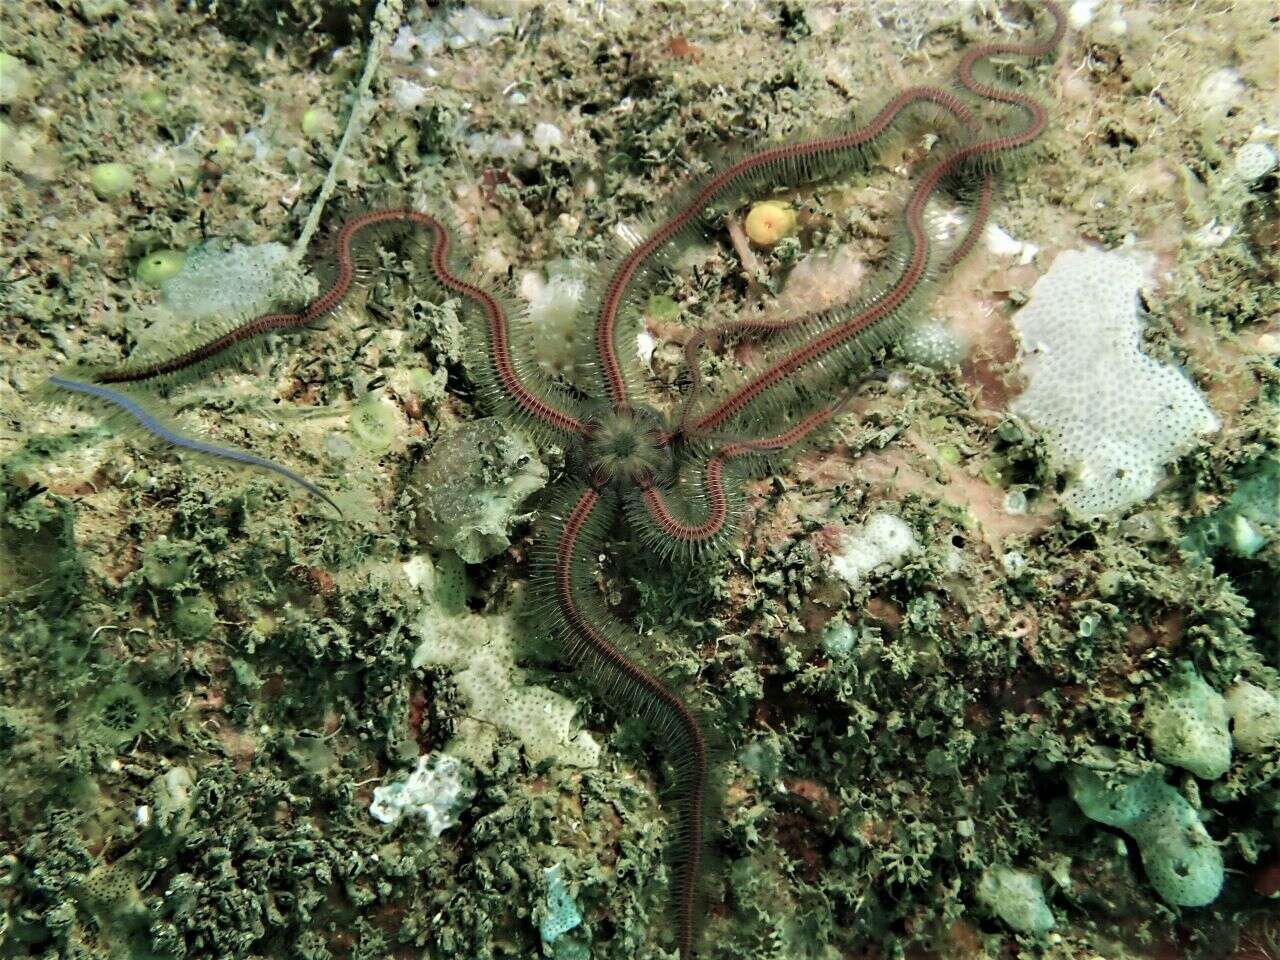 Image of purple-banded brittle star